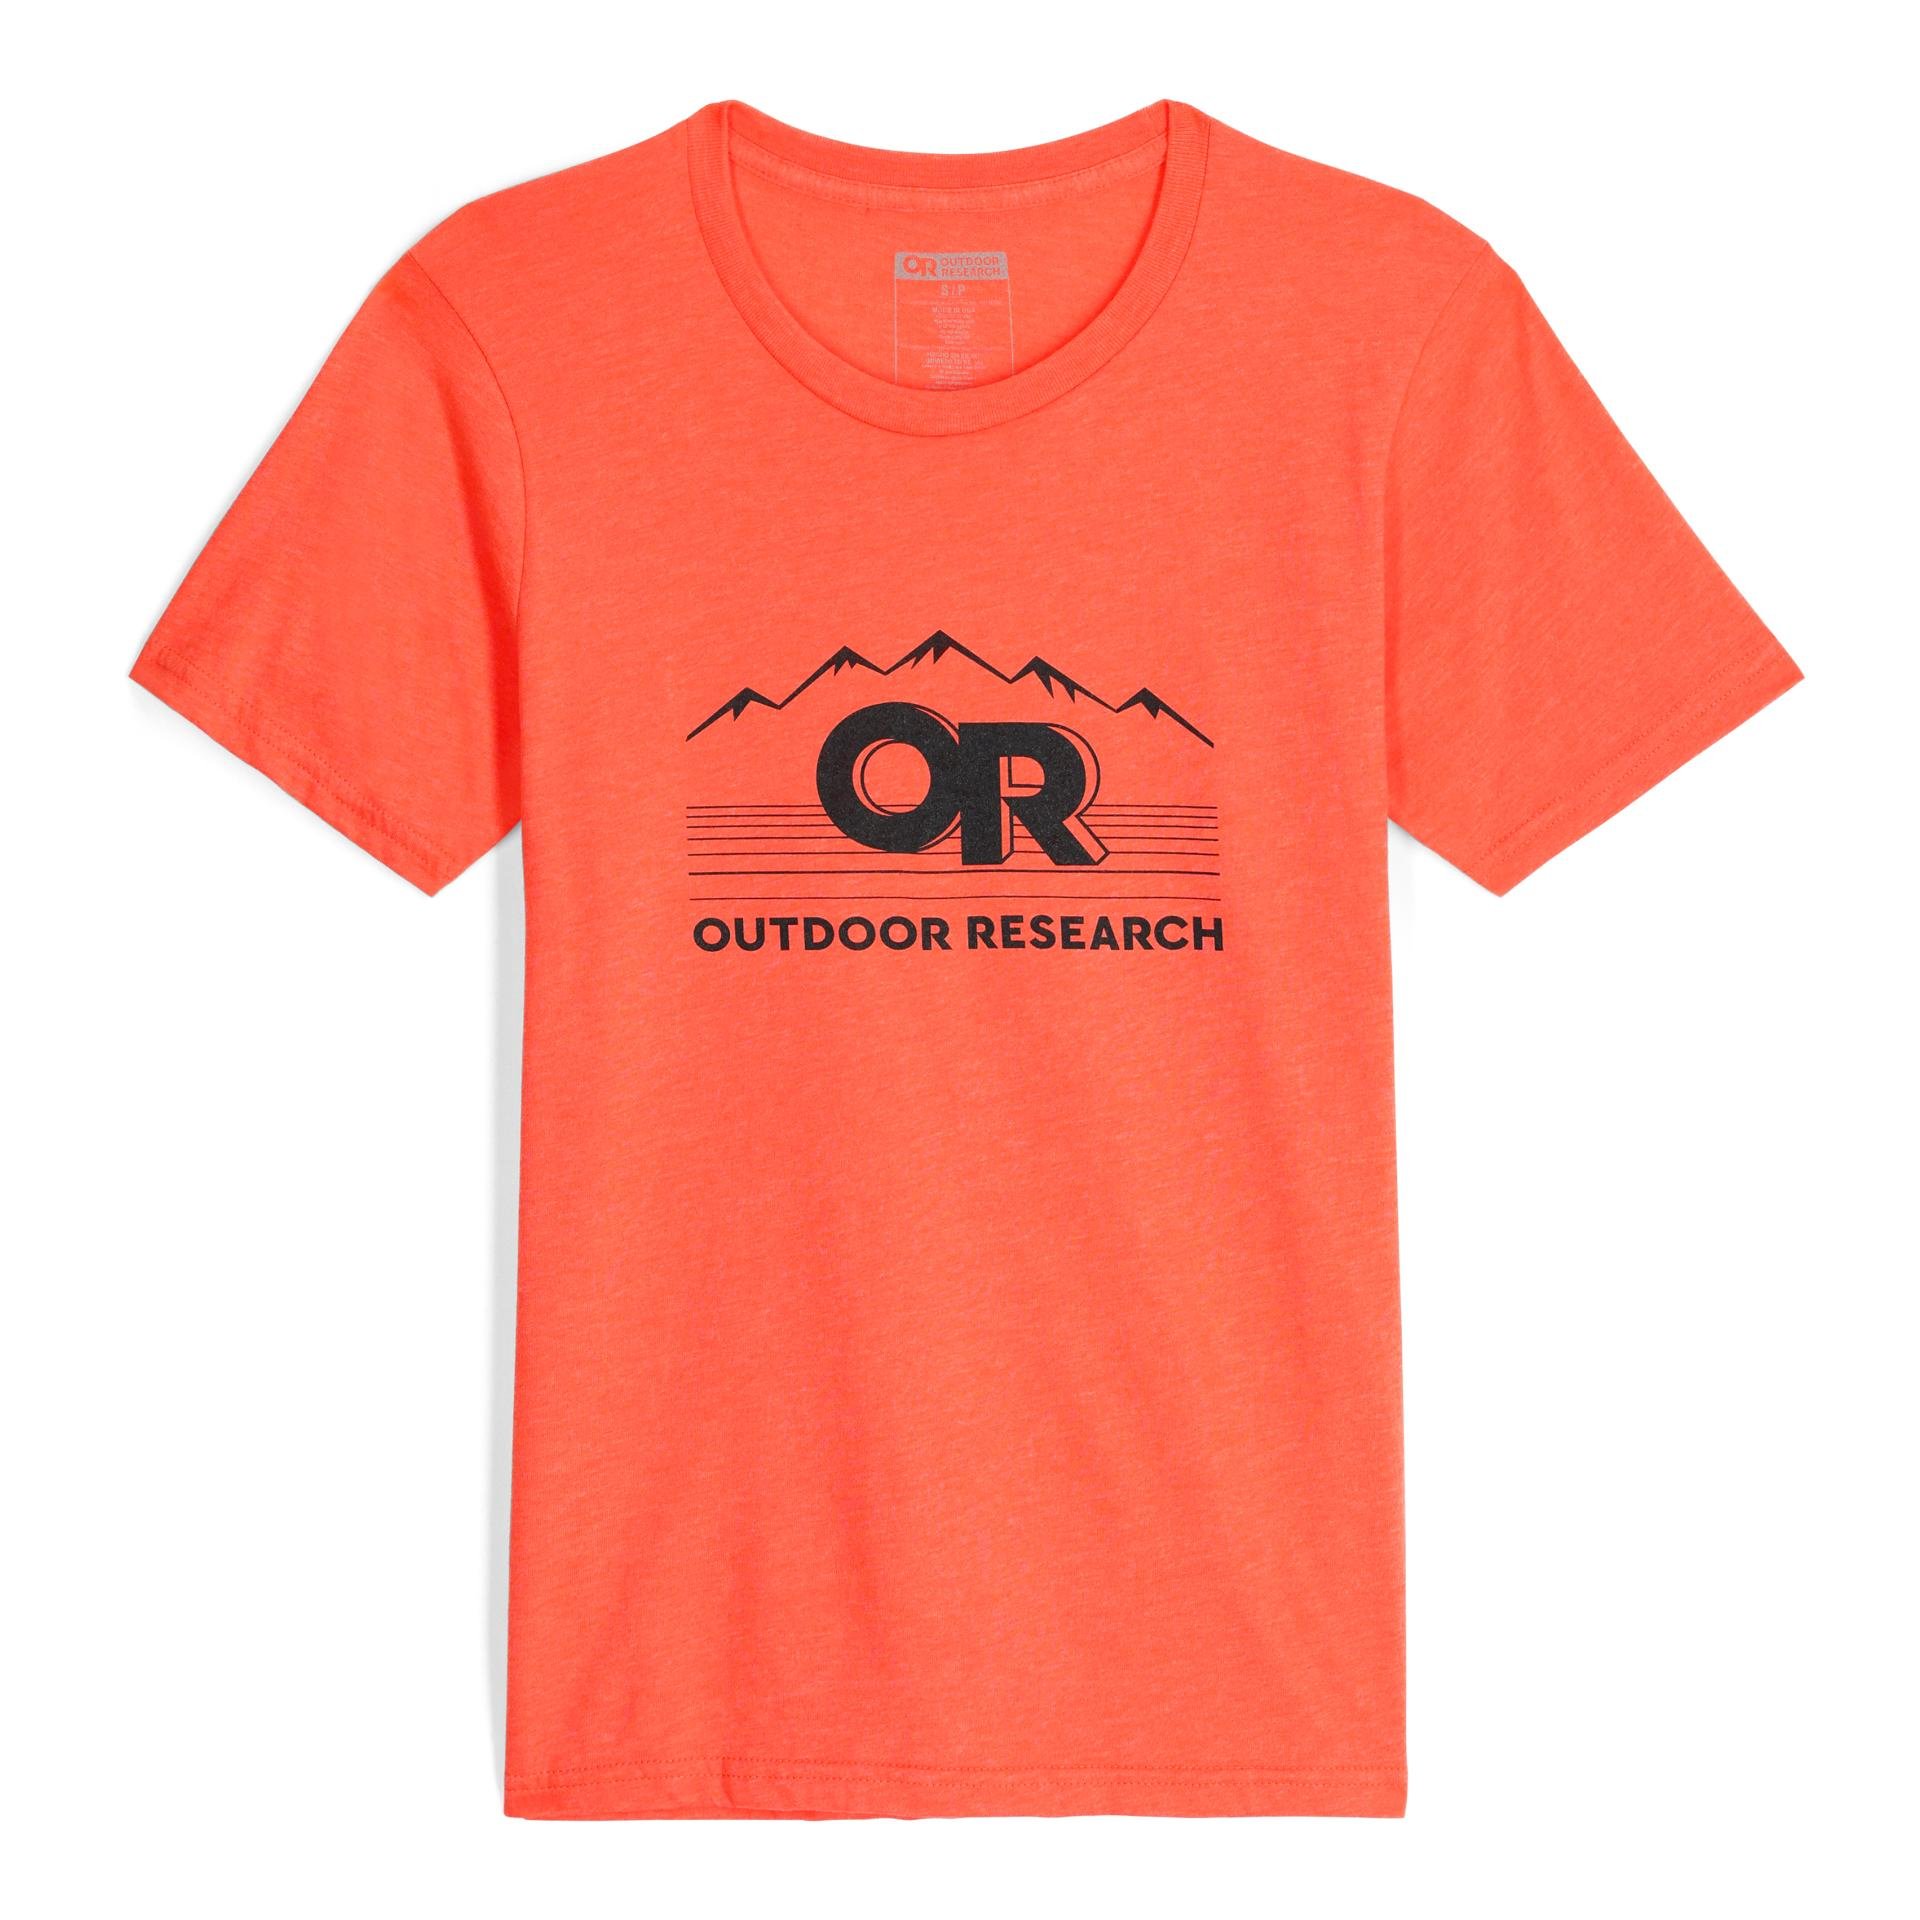 Outdoor Research Advocate T-Shirt